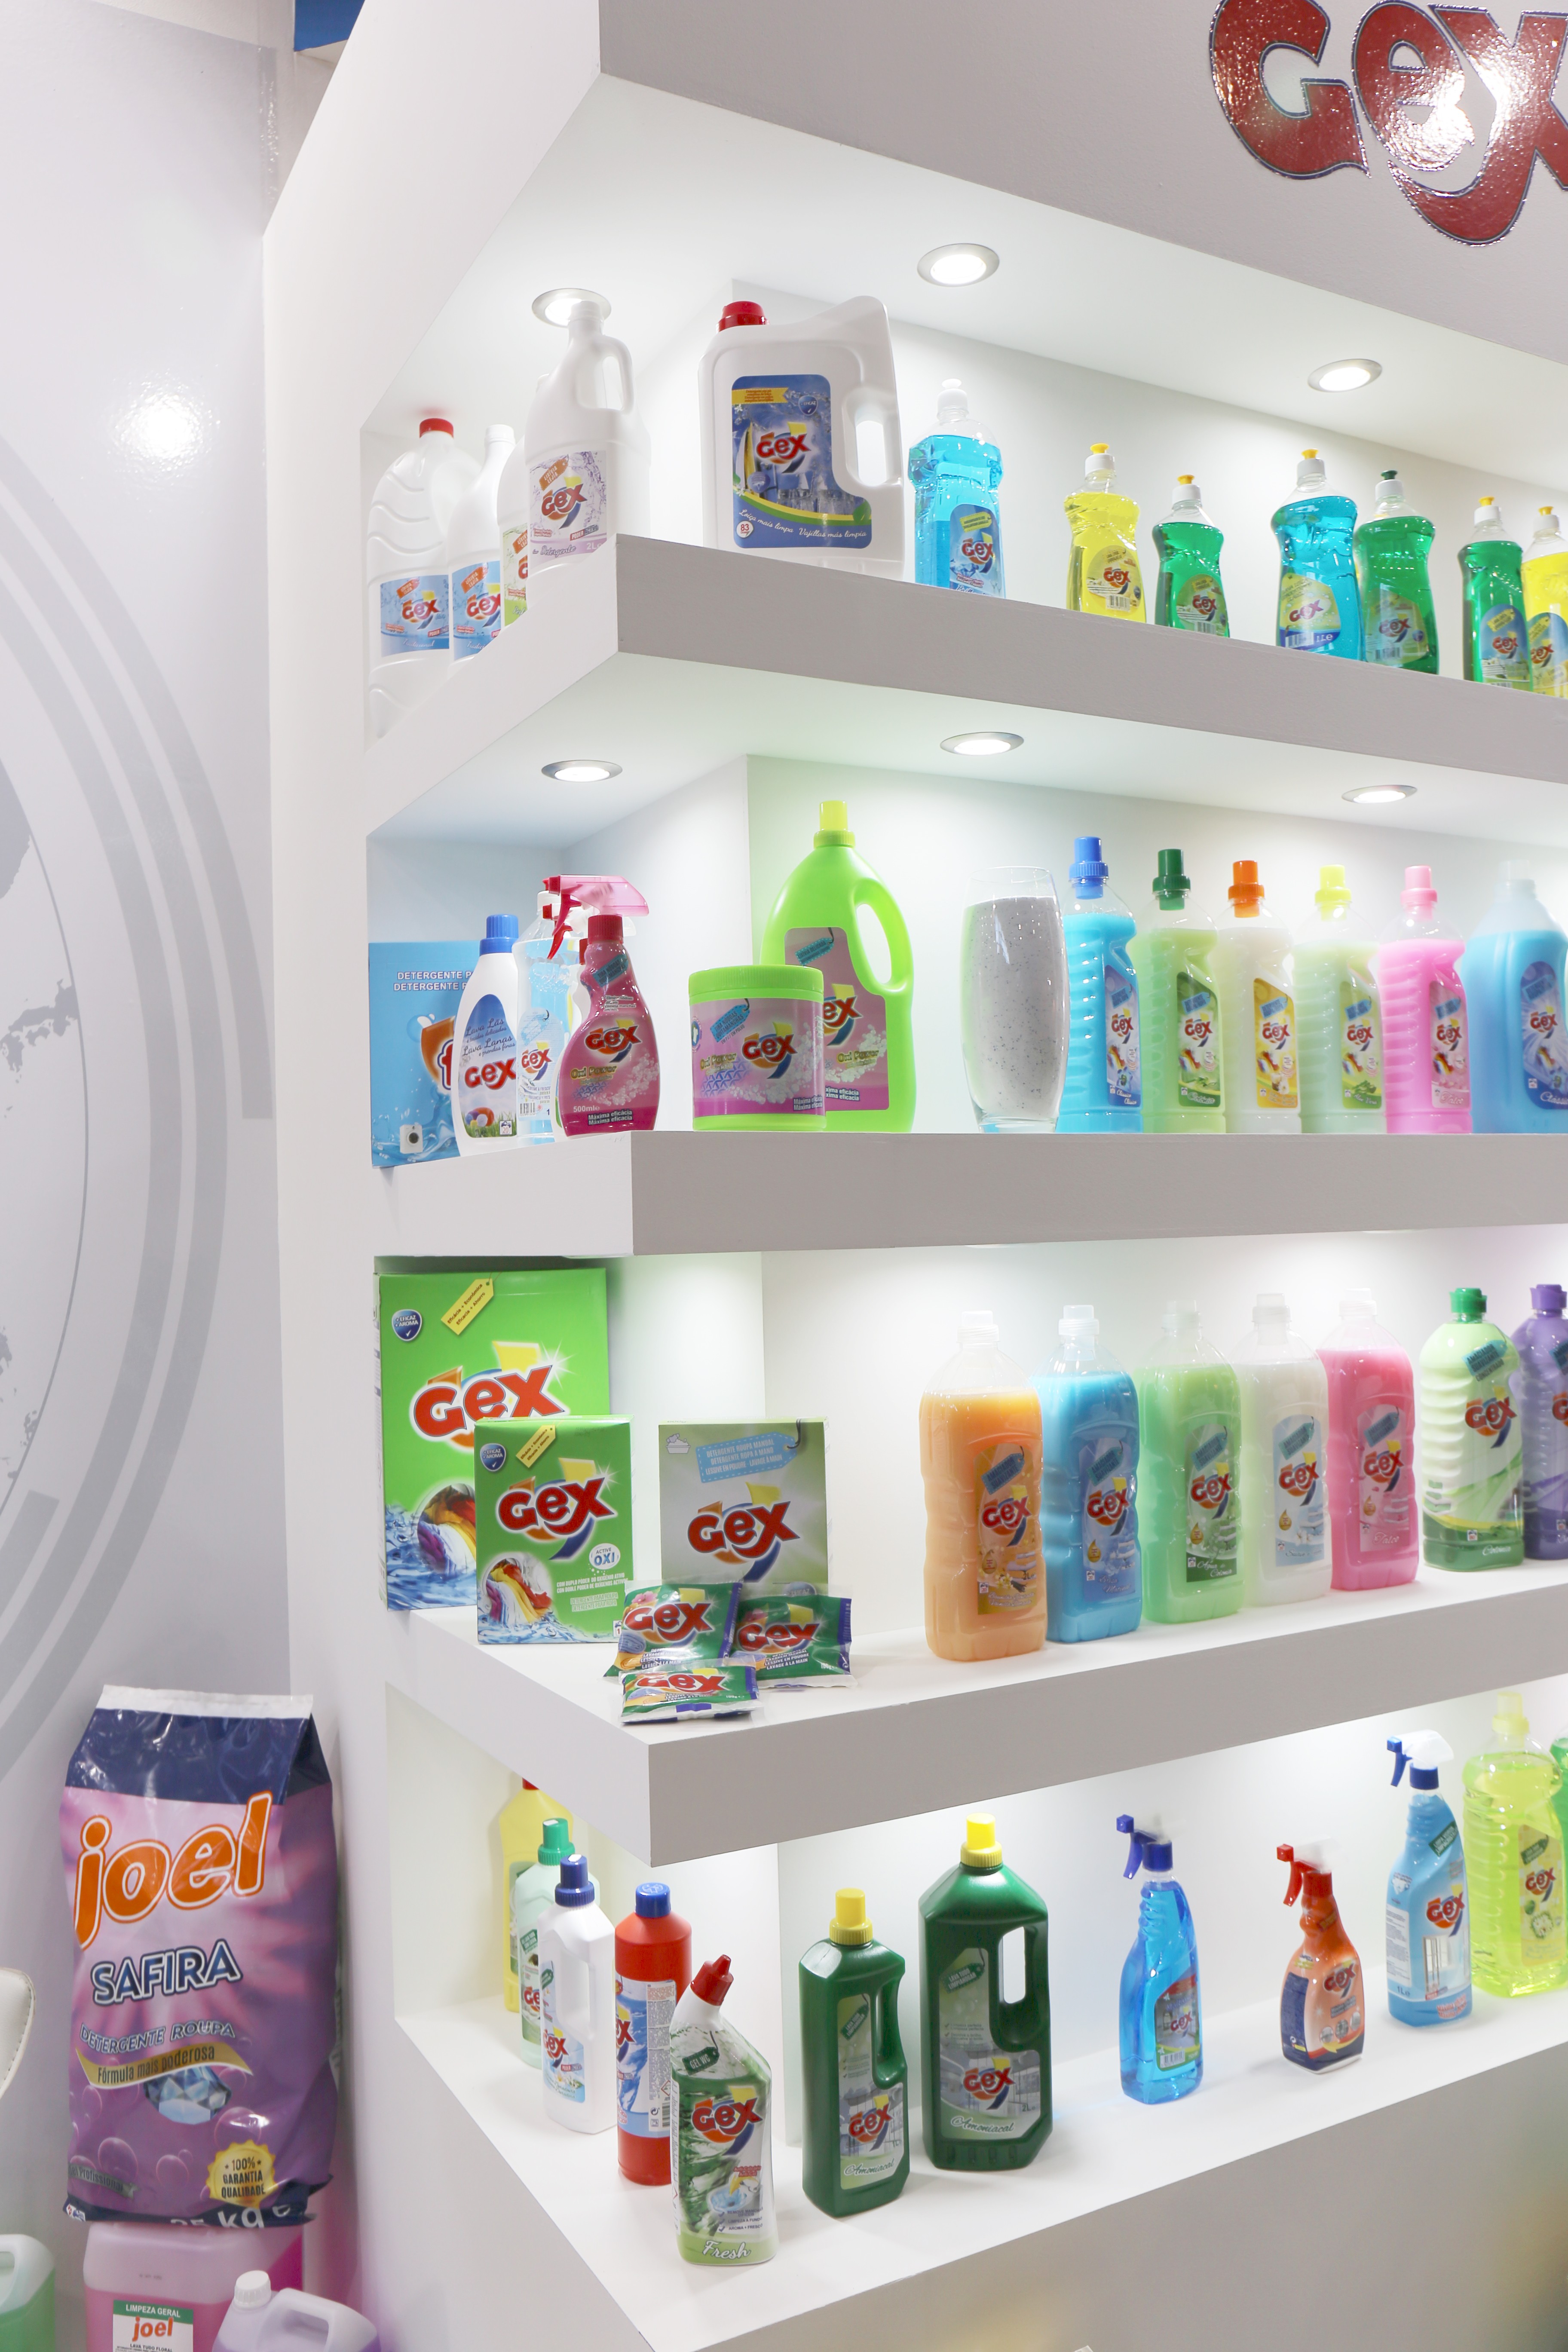 is there Justice Pearl Jodel Detergents | LinkedIn